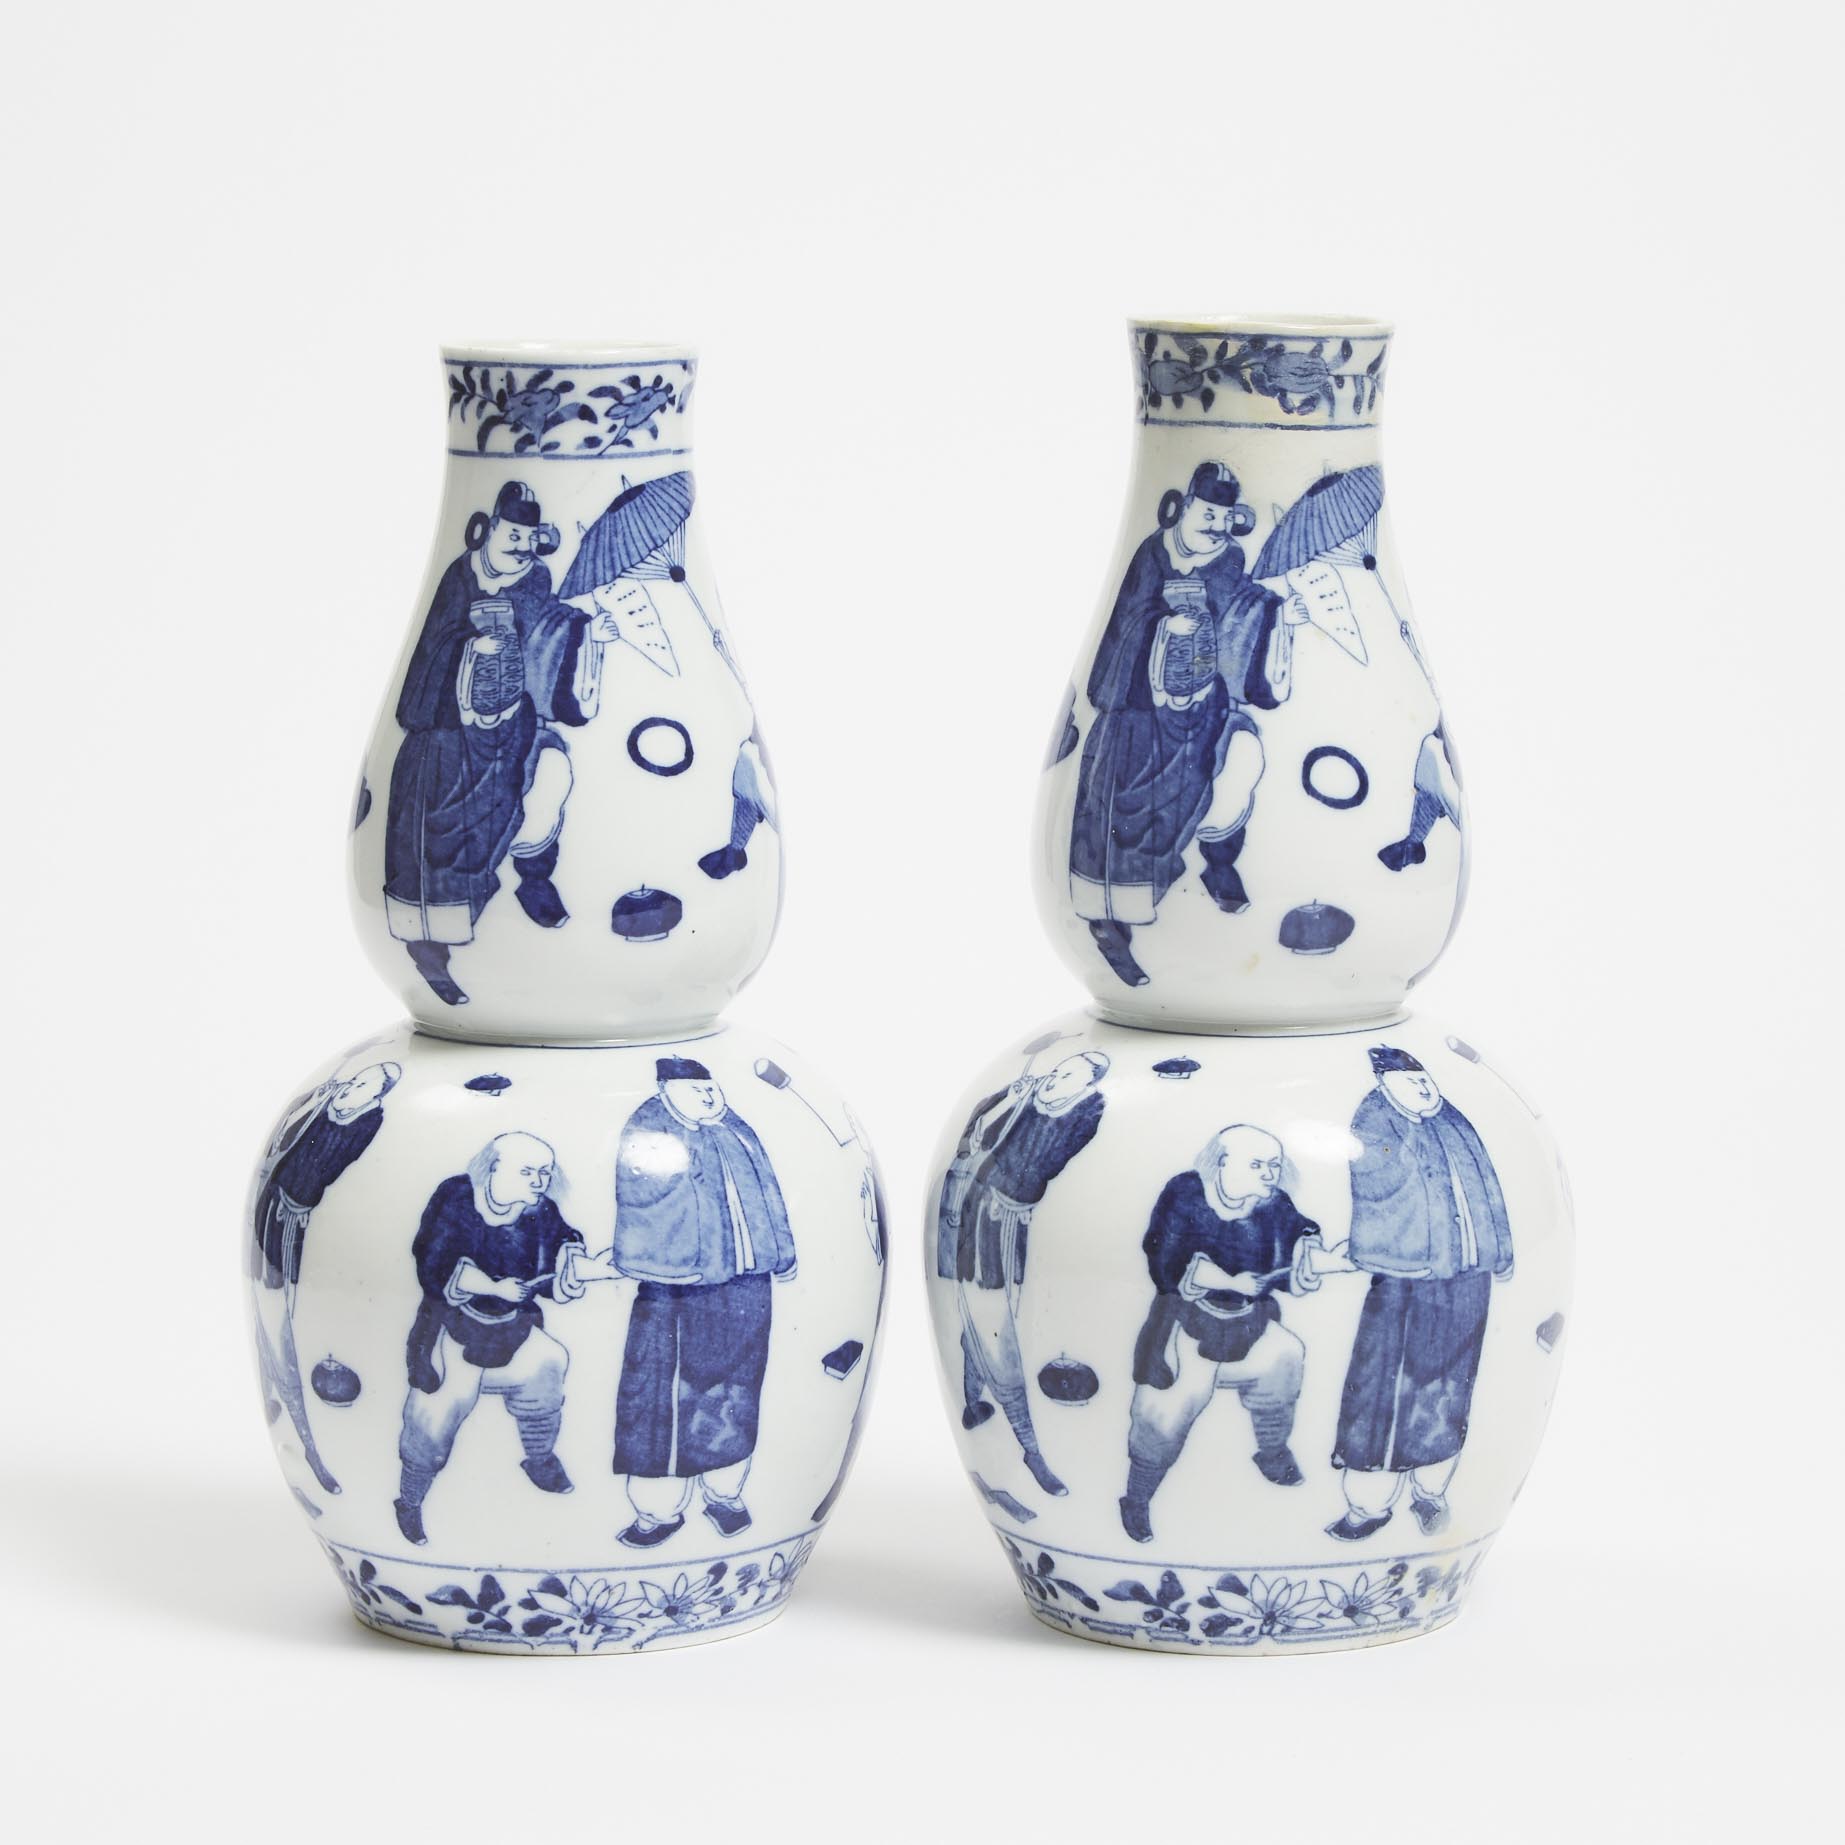 A Pair of German Transferware Blue and White Double Gourd Vases, Circa 1900